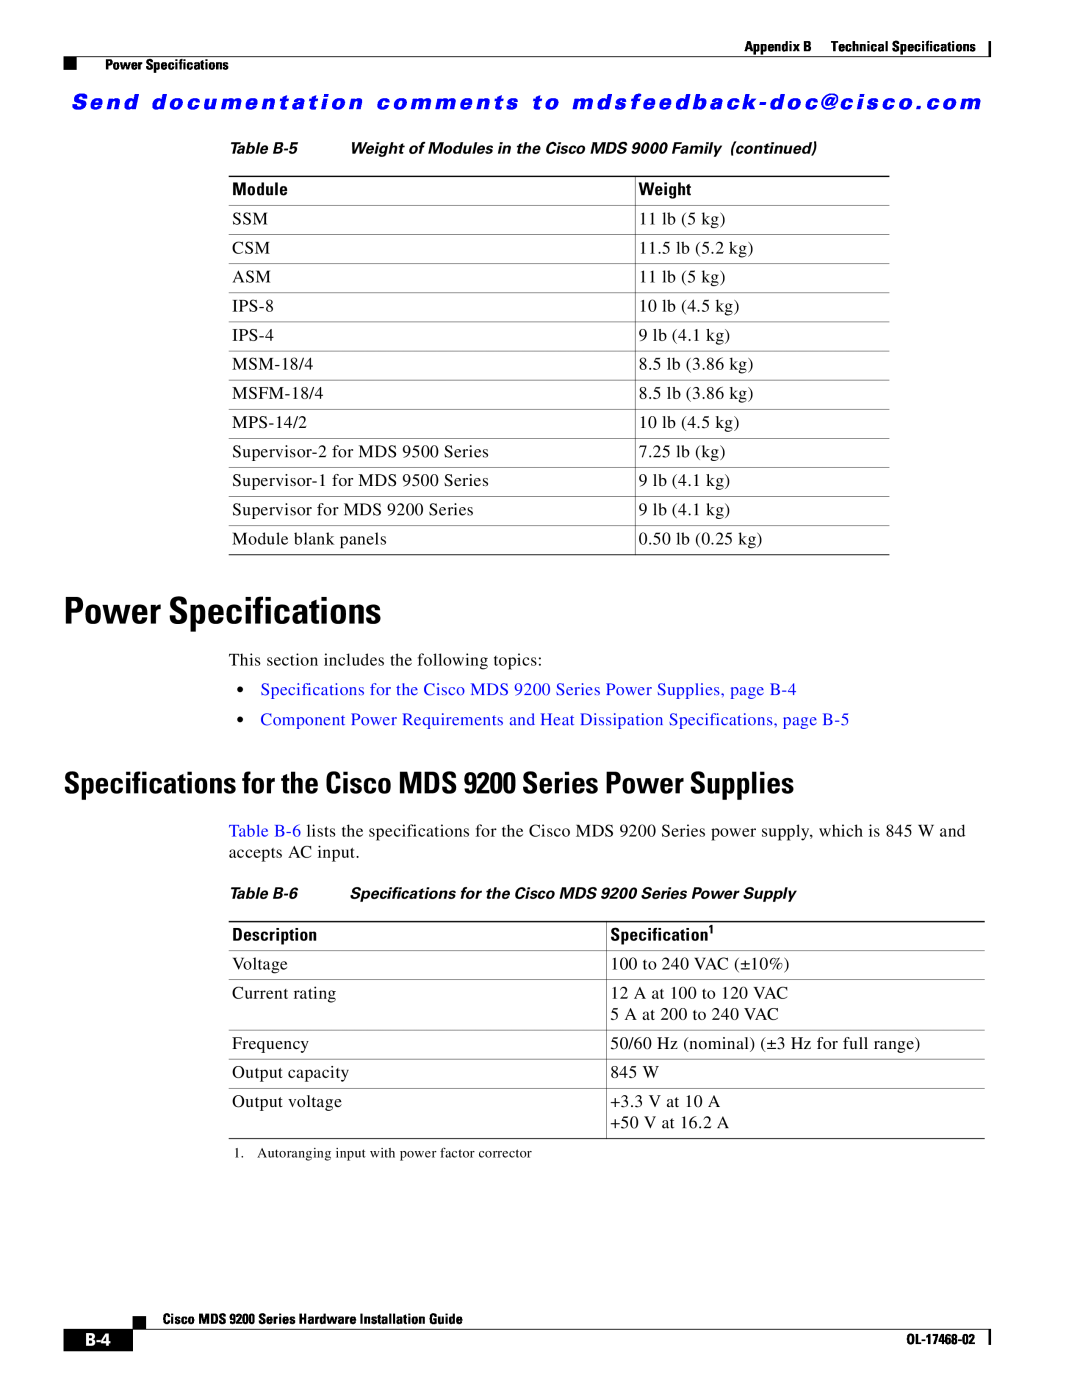 Cisco Systems manual Power Specifications, Specifications for the Cisco MDS 9200 Series Power Supplies 